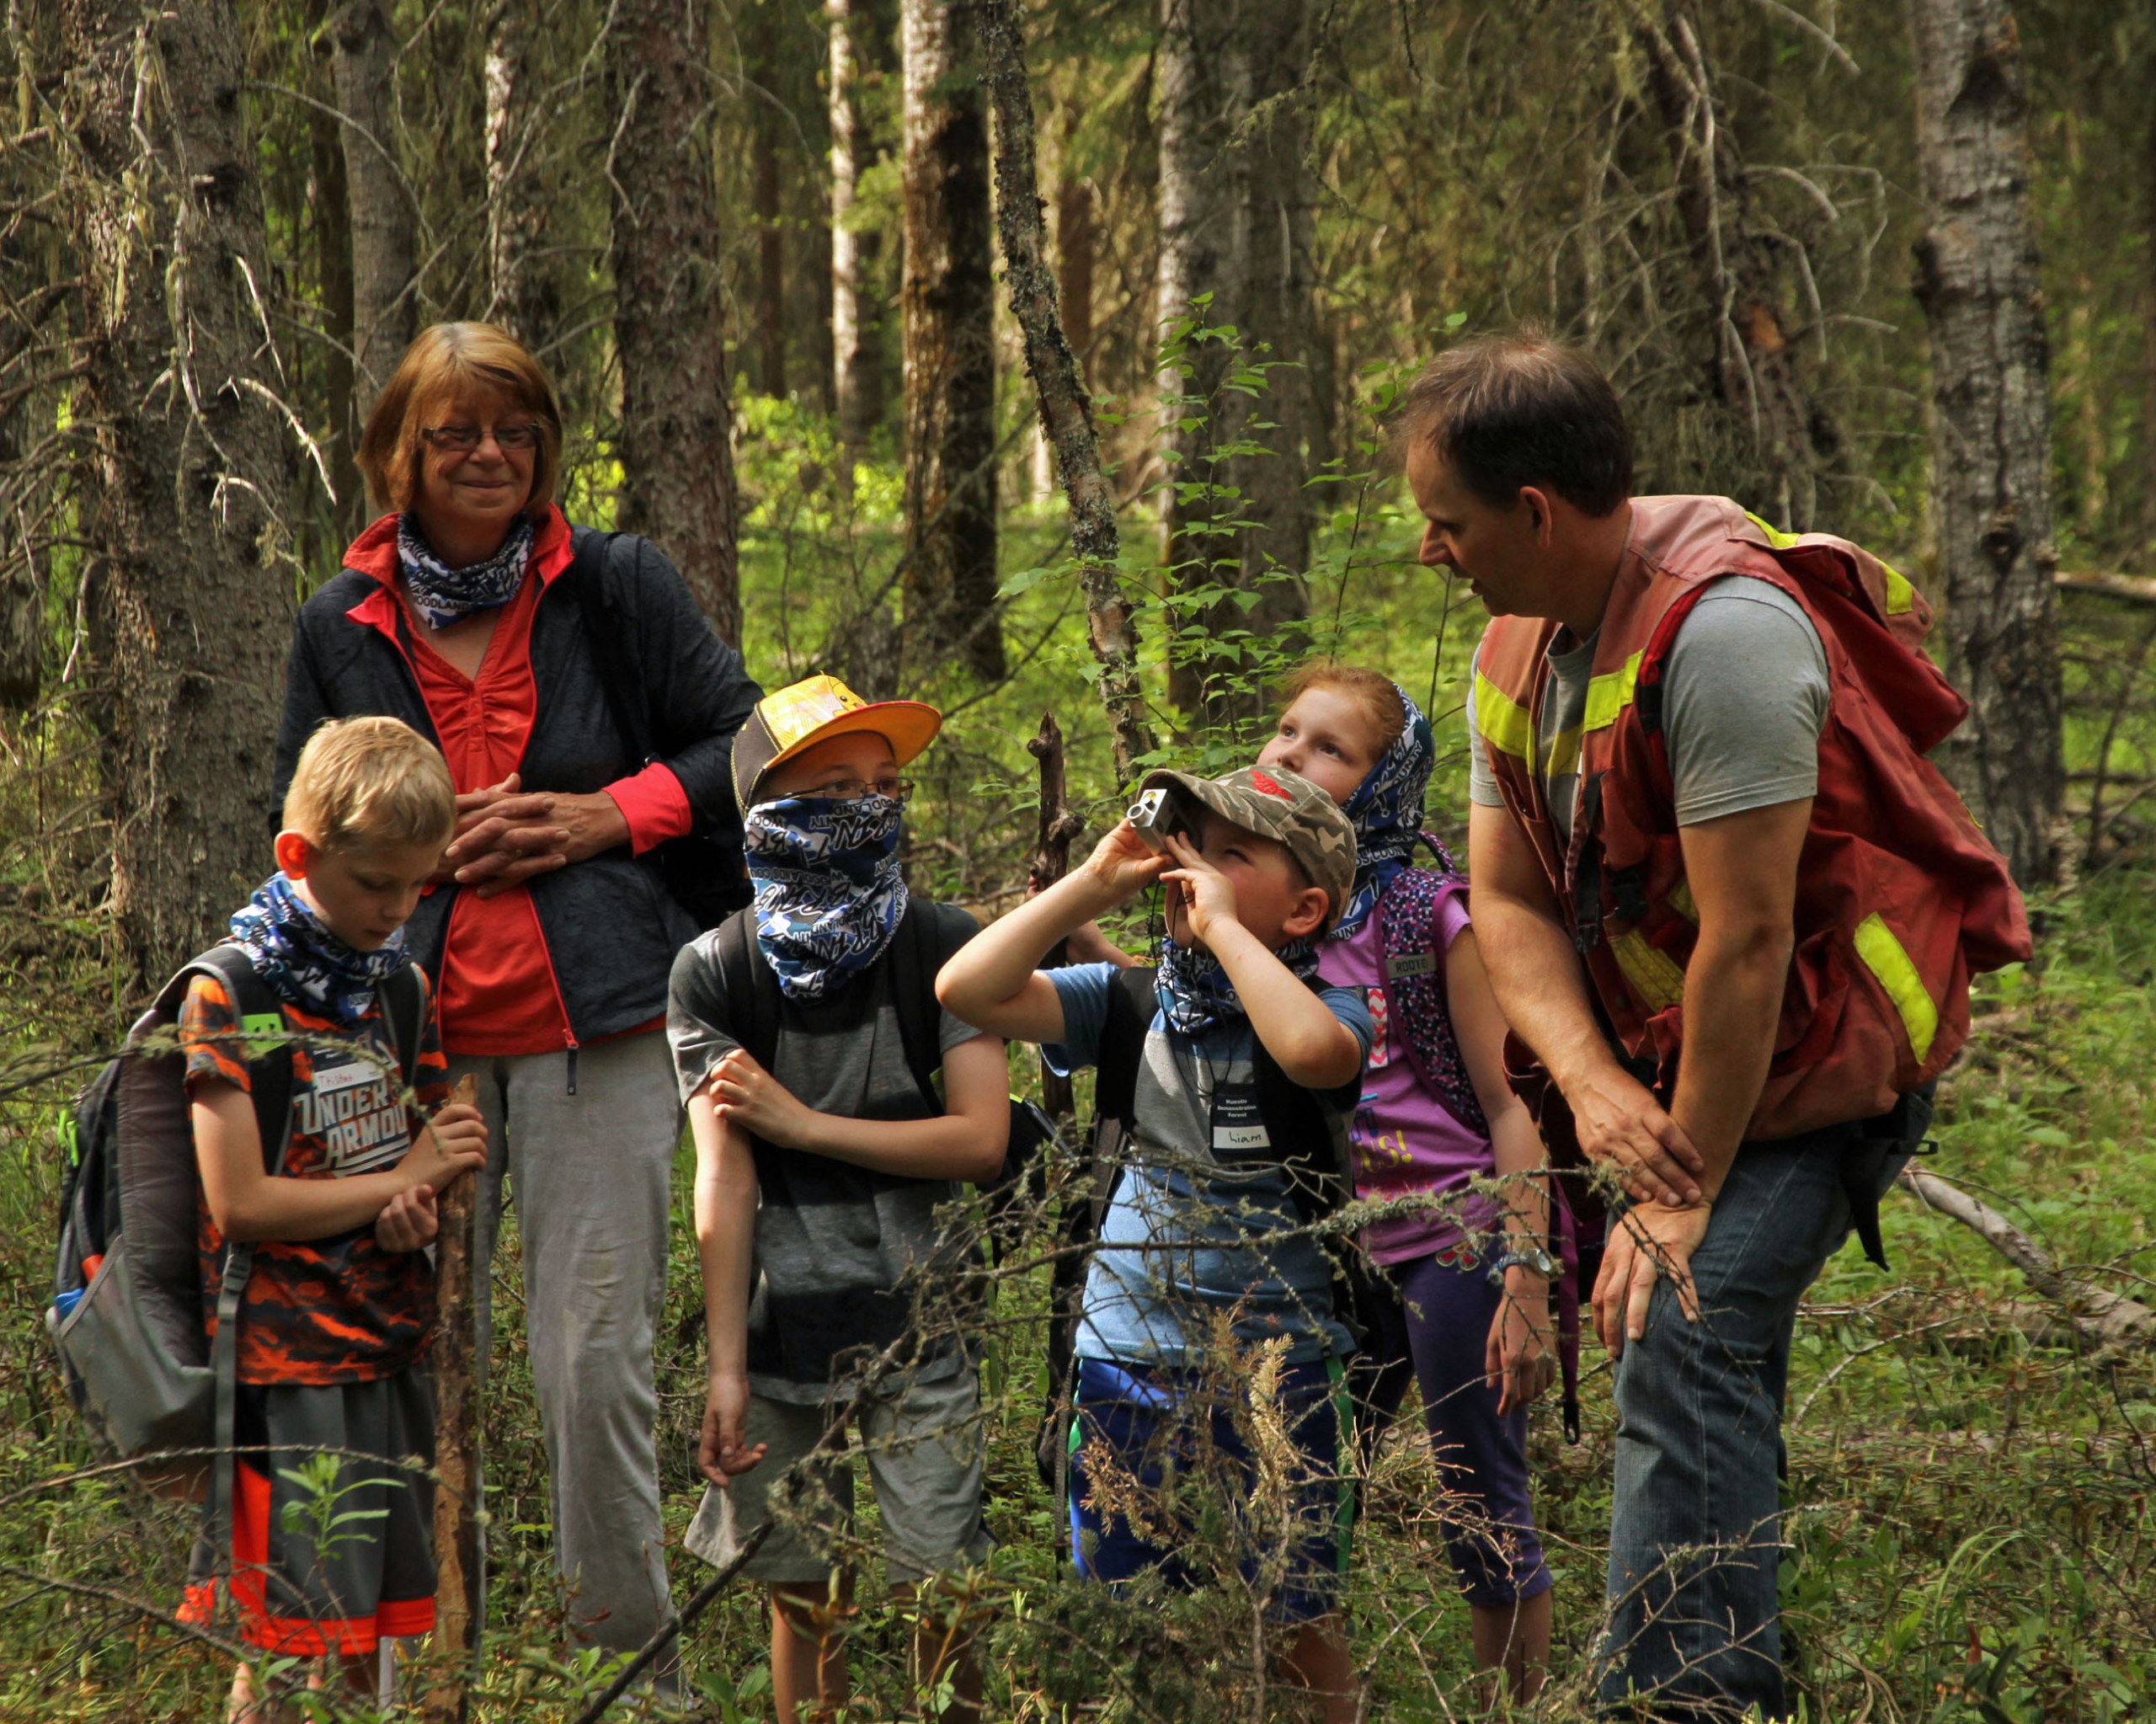 Helping young students learn about forest renewal by